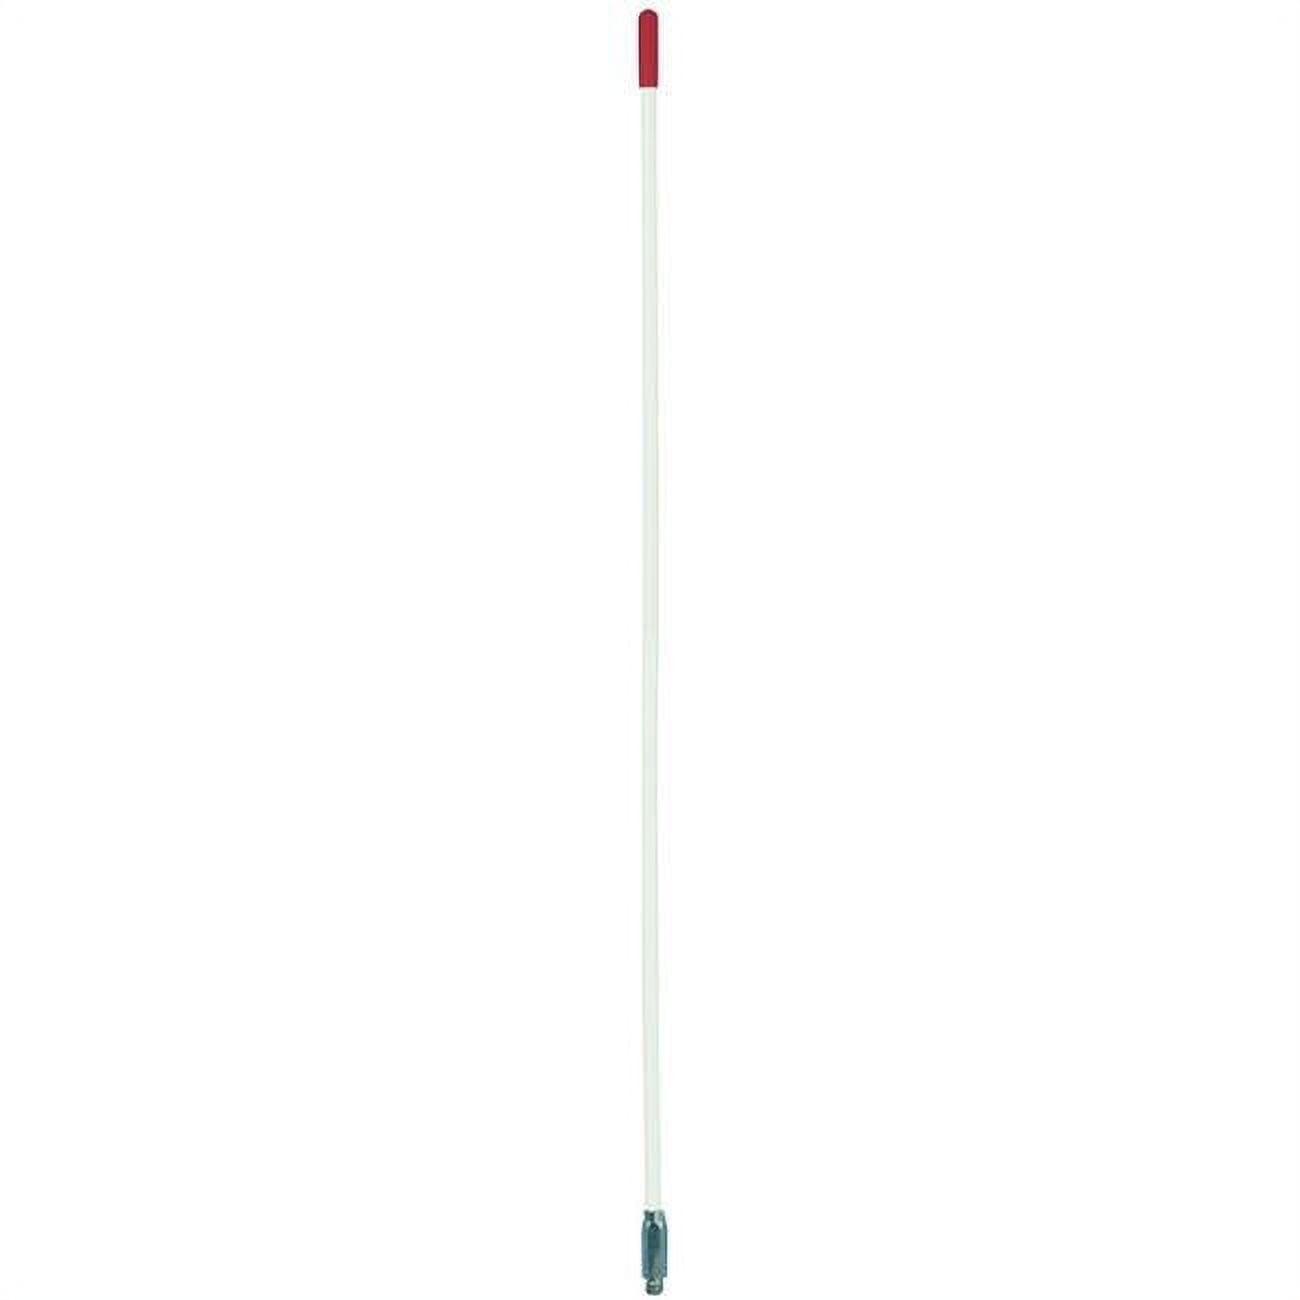 Picture of Accessories Unlimited AU22-W 3 ft. Fiberglass CB Antenna with 0.38 x 24 in. Threads - White